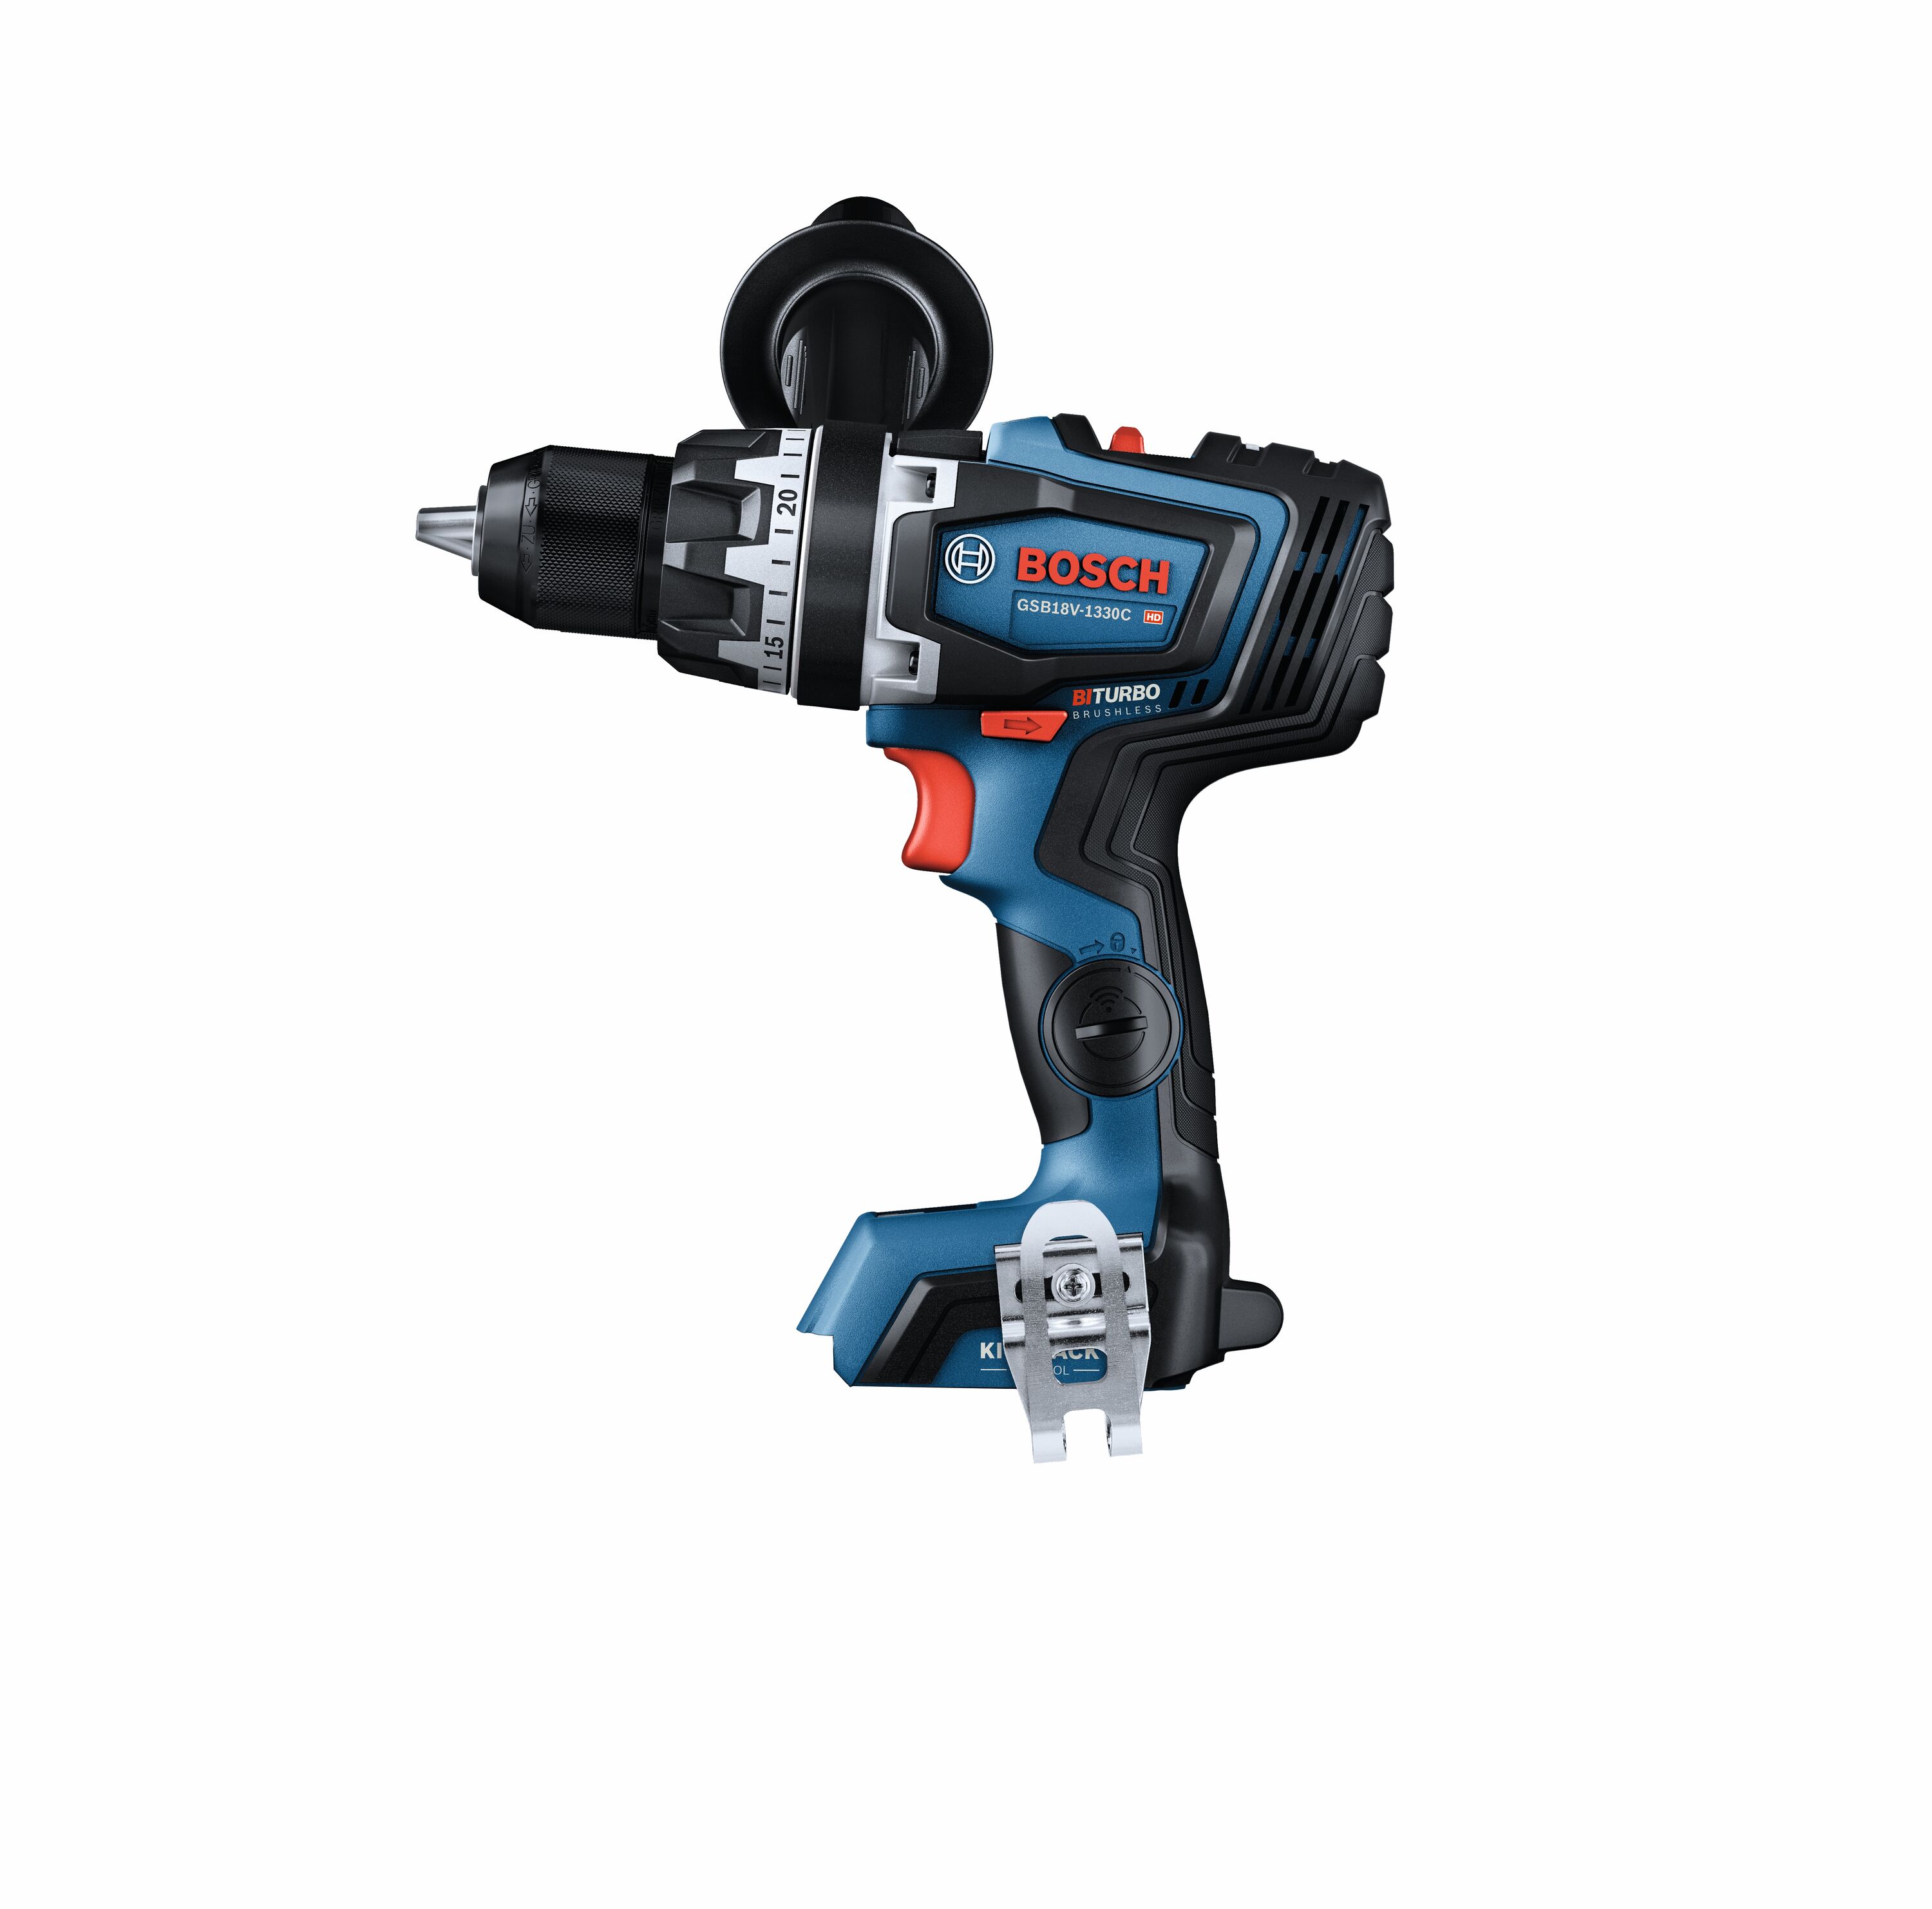 Bosch GAS 18V-1 (2 stores) find prices • Compare today »